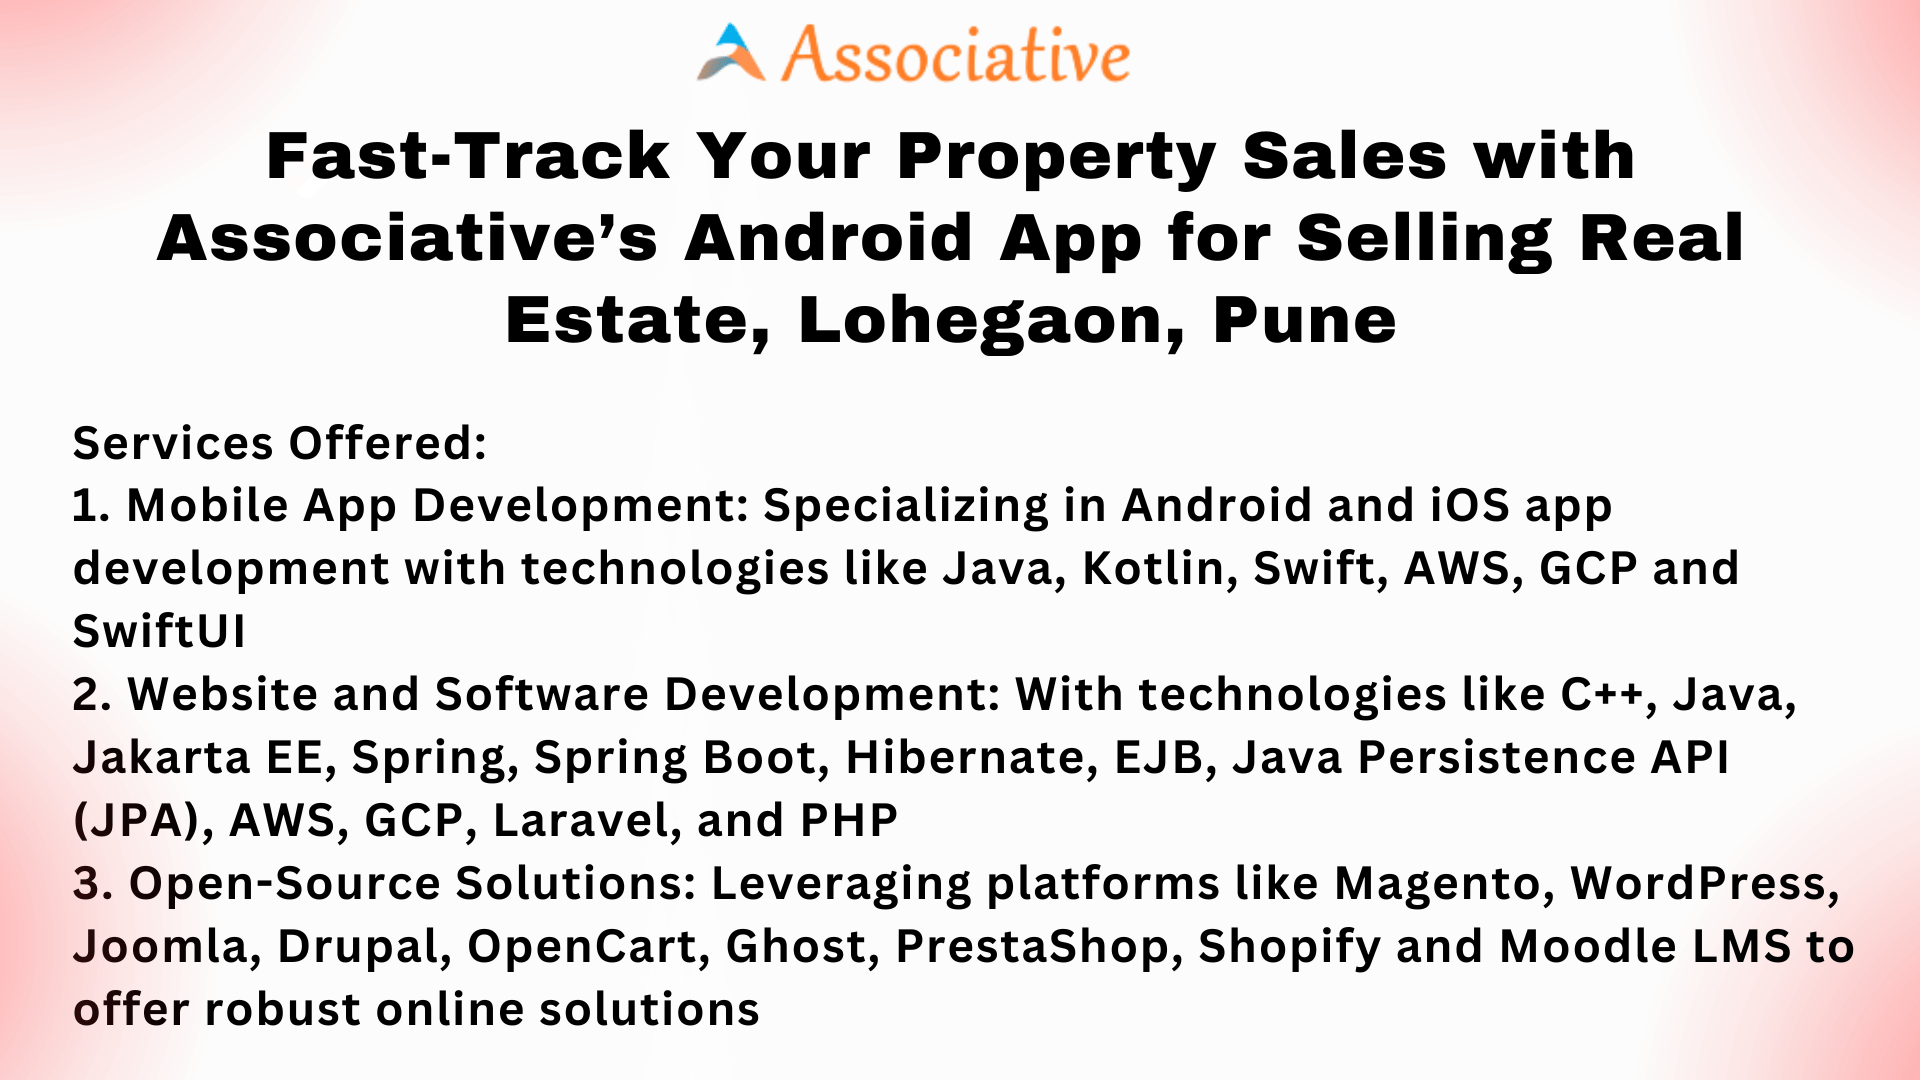 Fast-Track Your Property Sales with Associative’s Android App for Selling Real Estate, Lohegaon, Pune